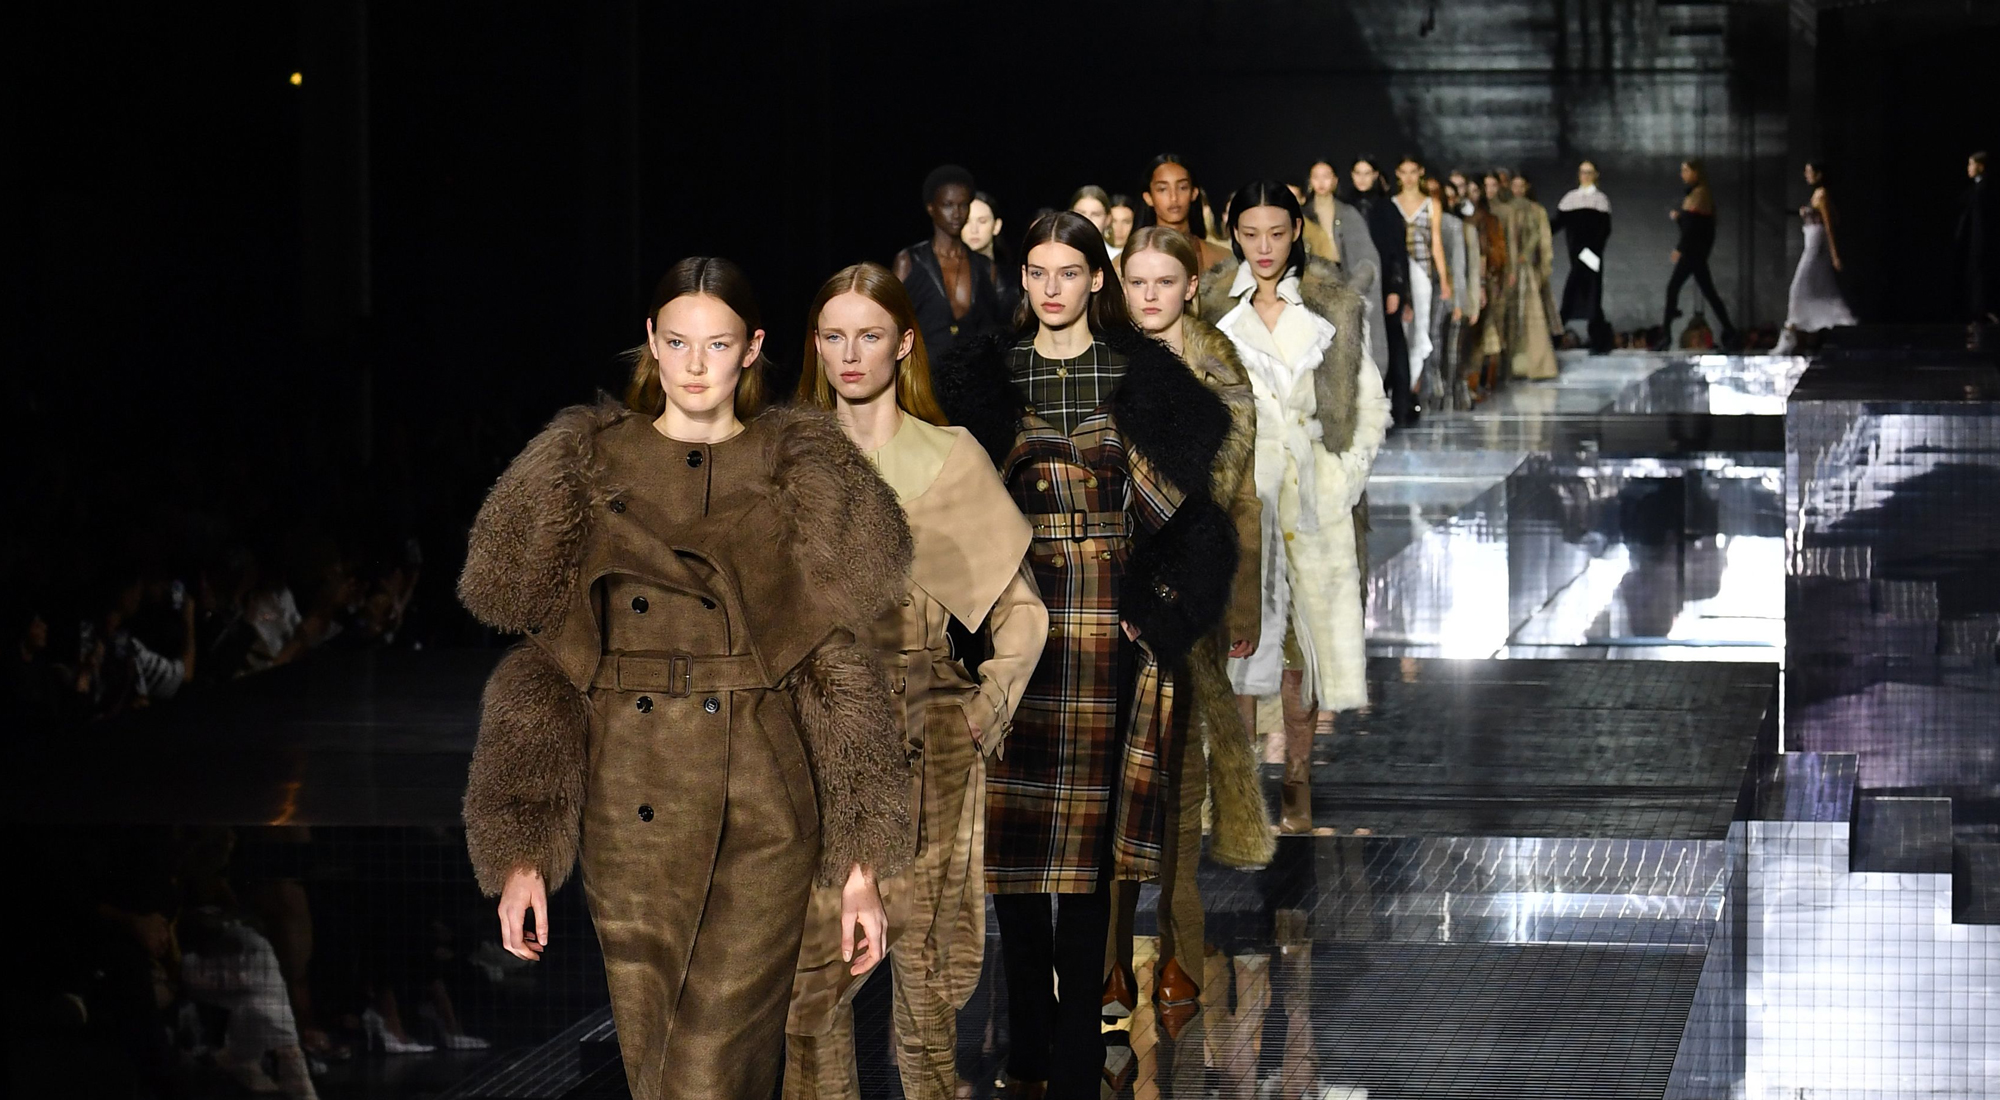 Burberry Aims to Reduce Markdowns to Shore Up Profitability - Bloomberg